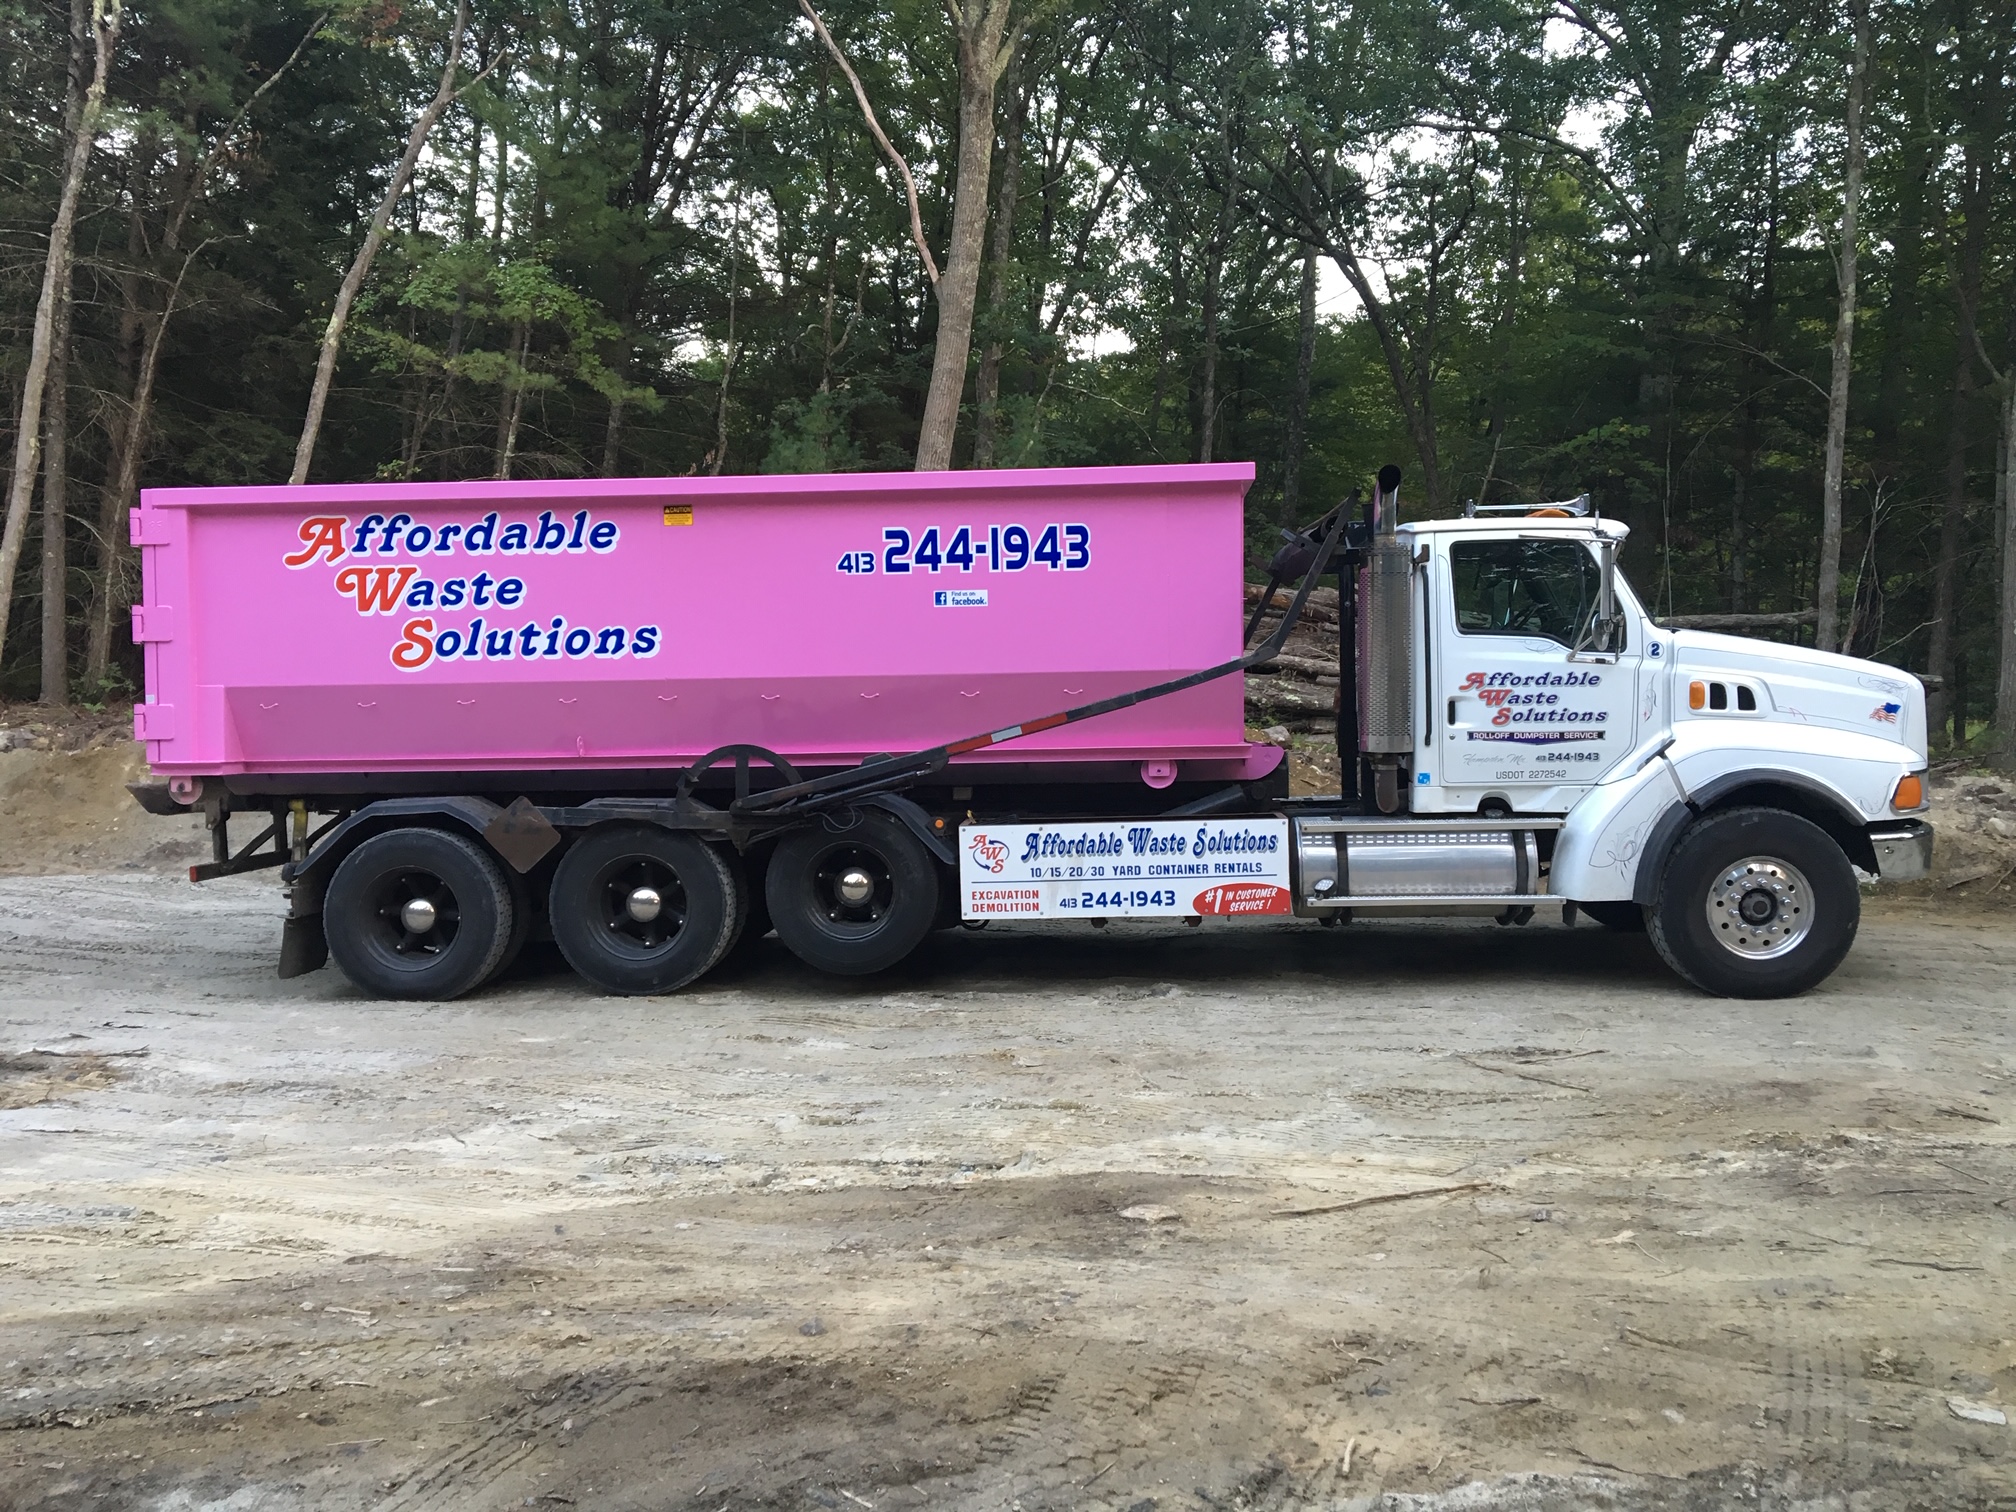 New looking truck of Affordable Waste Solutions